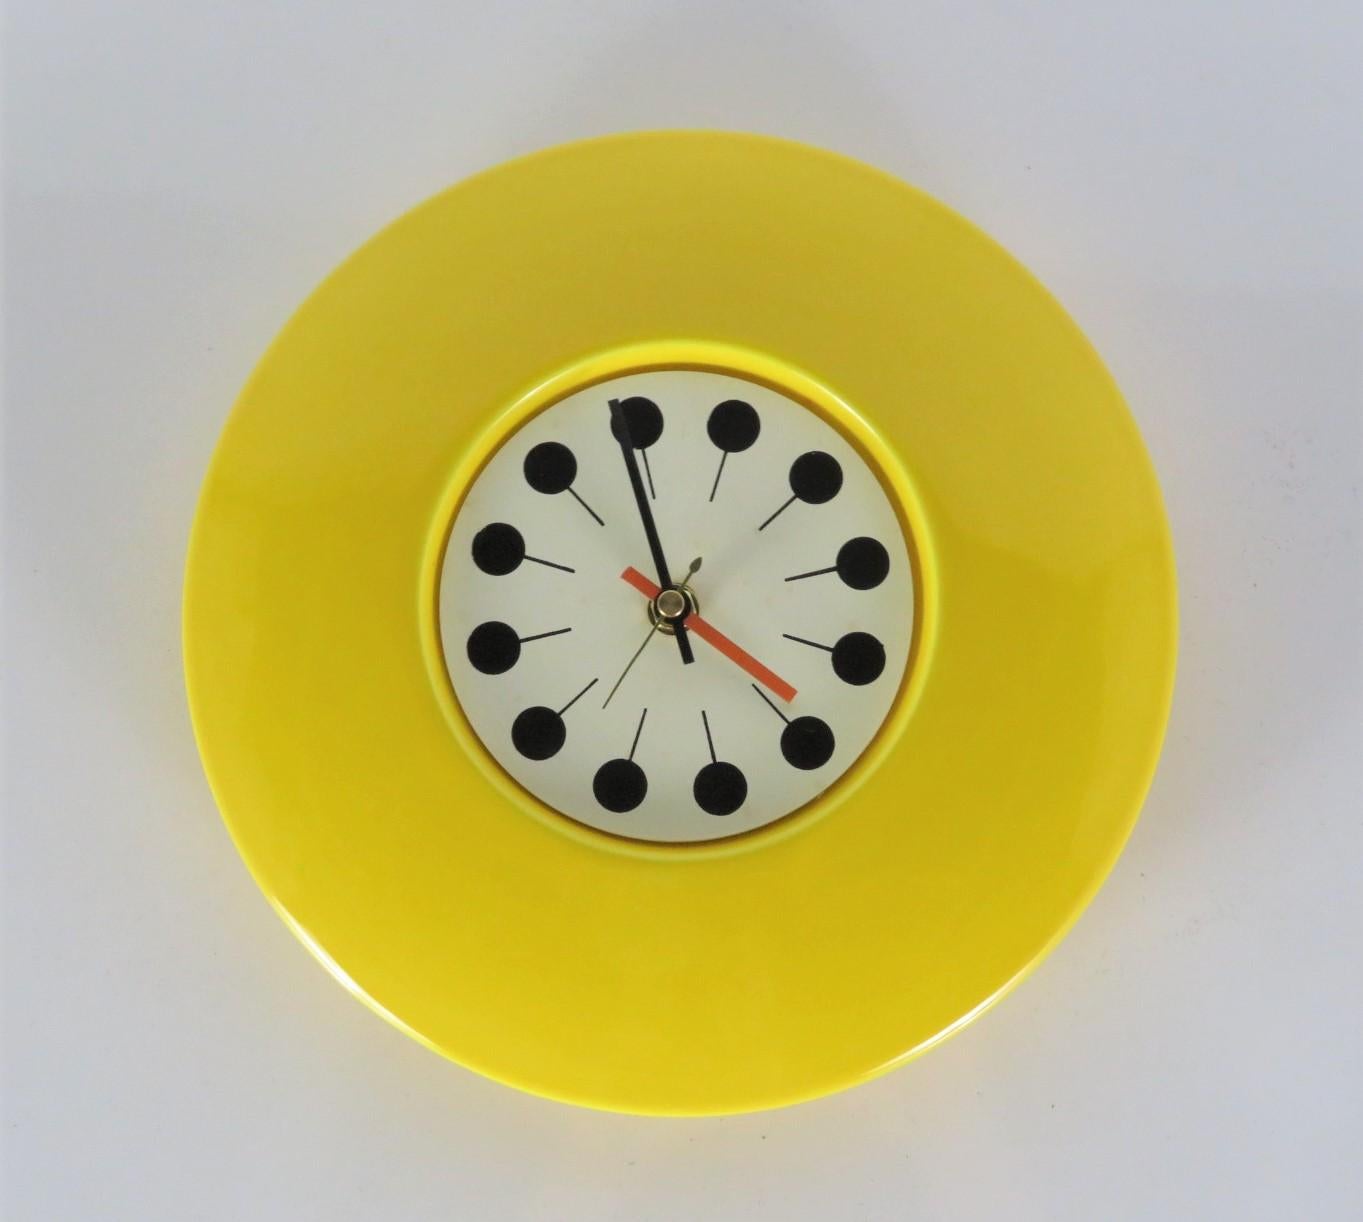 Space Age Mid-Century Modern ceramic wall clock from the 1960s. The clock has an UFO flying saucer shaped body and AA battery operated new clock movement matching the replaced old one. In perfect order, no issues. Very Pop with it's yellow, black